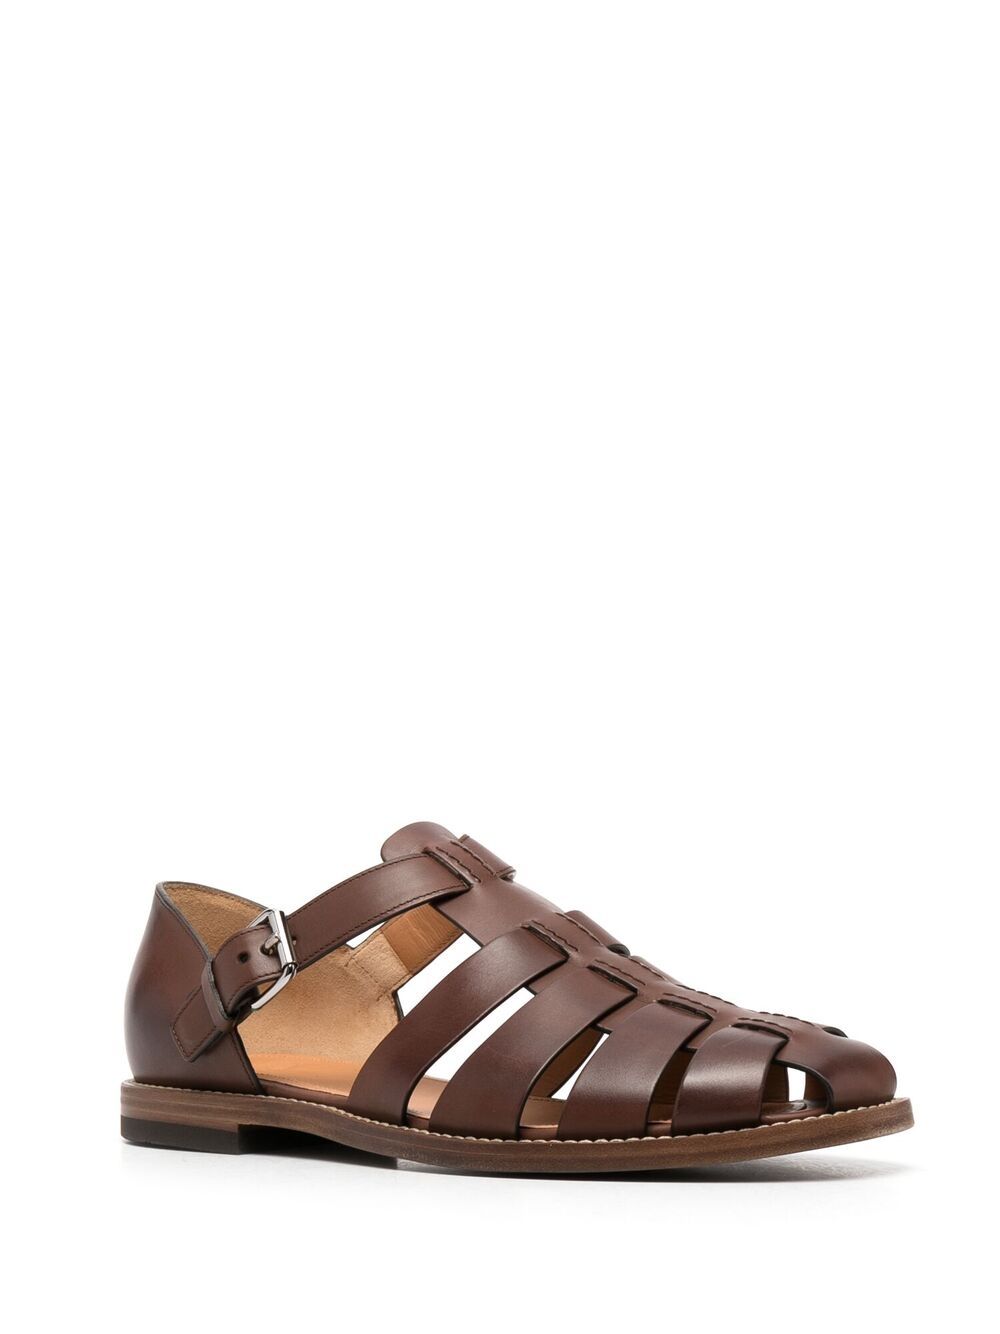 Church's brown Fisherman leather sandals for men | EX00029XM at ...